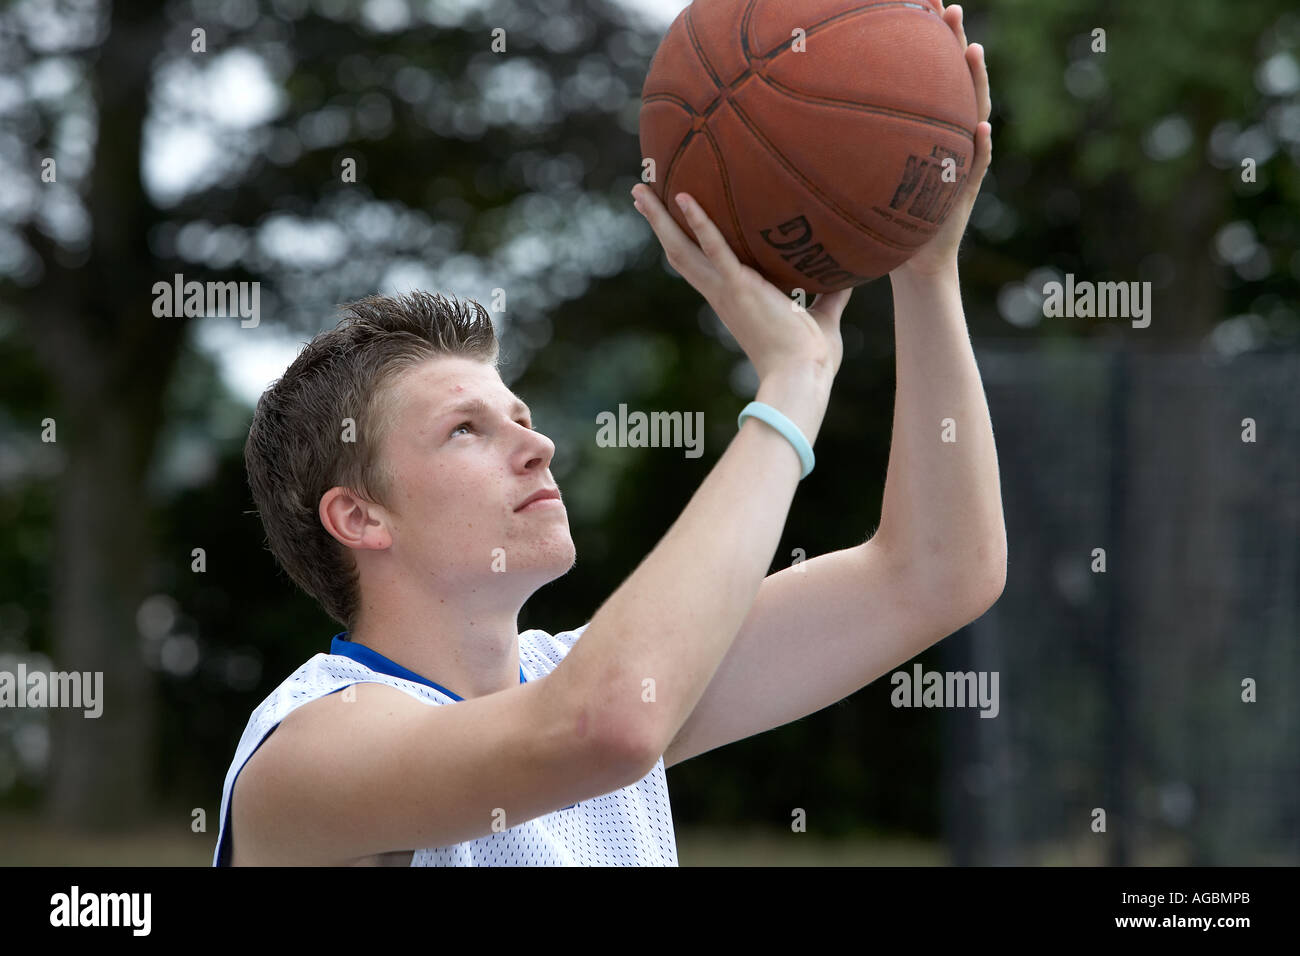 Basketball player aims for the hoop Stock Photo